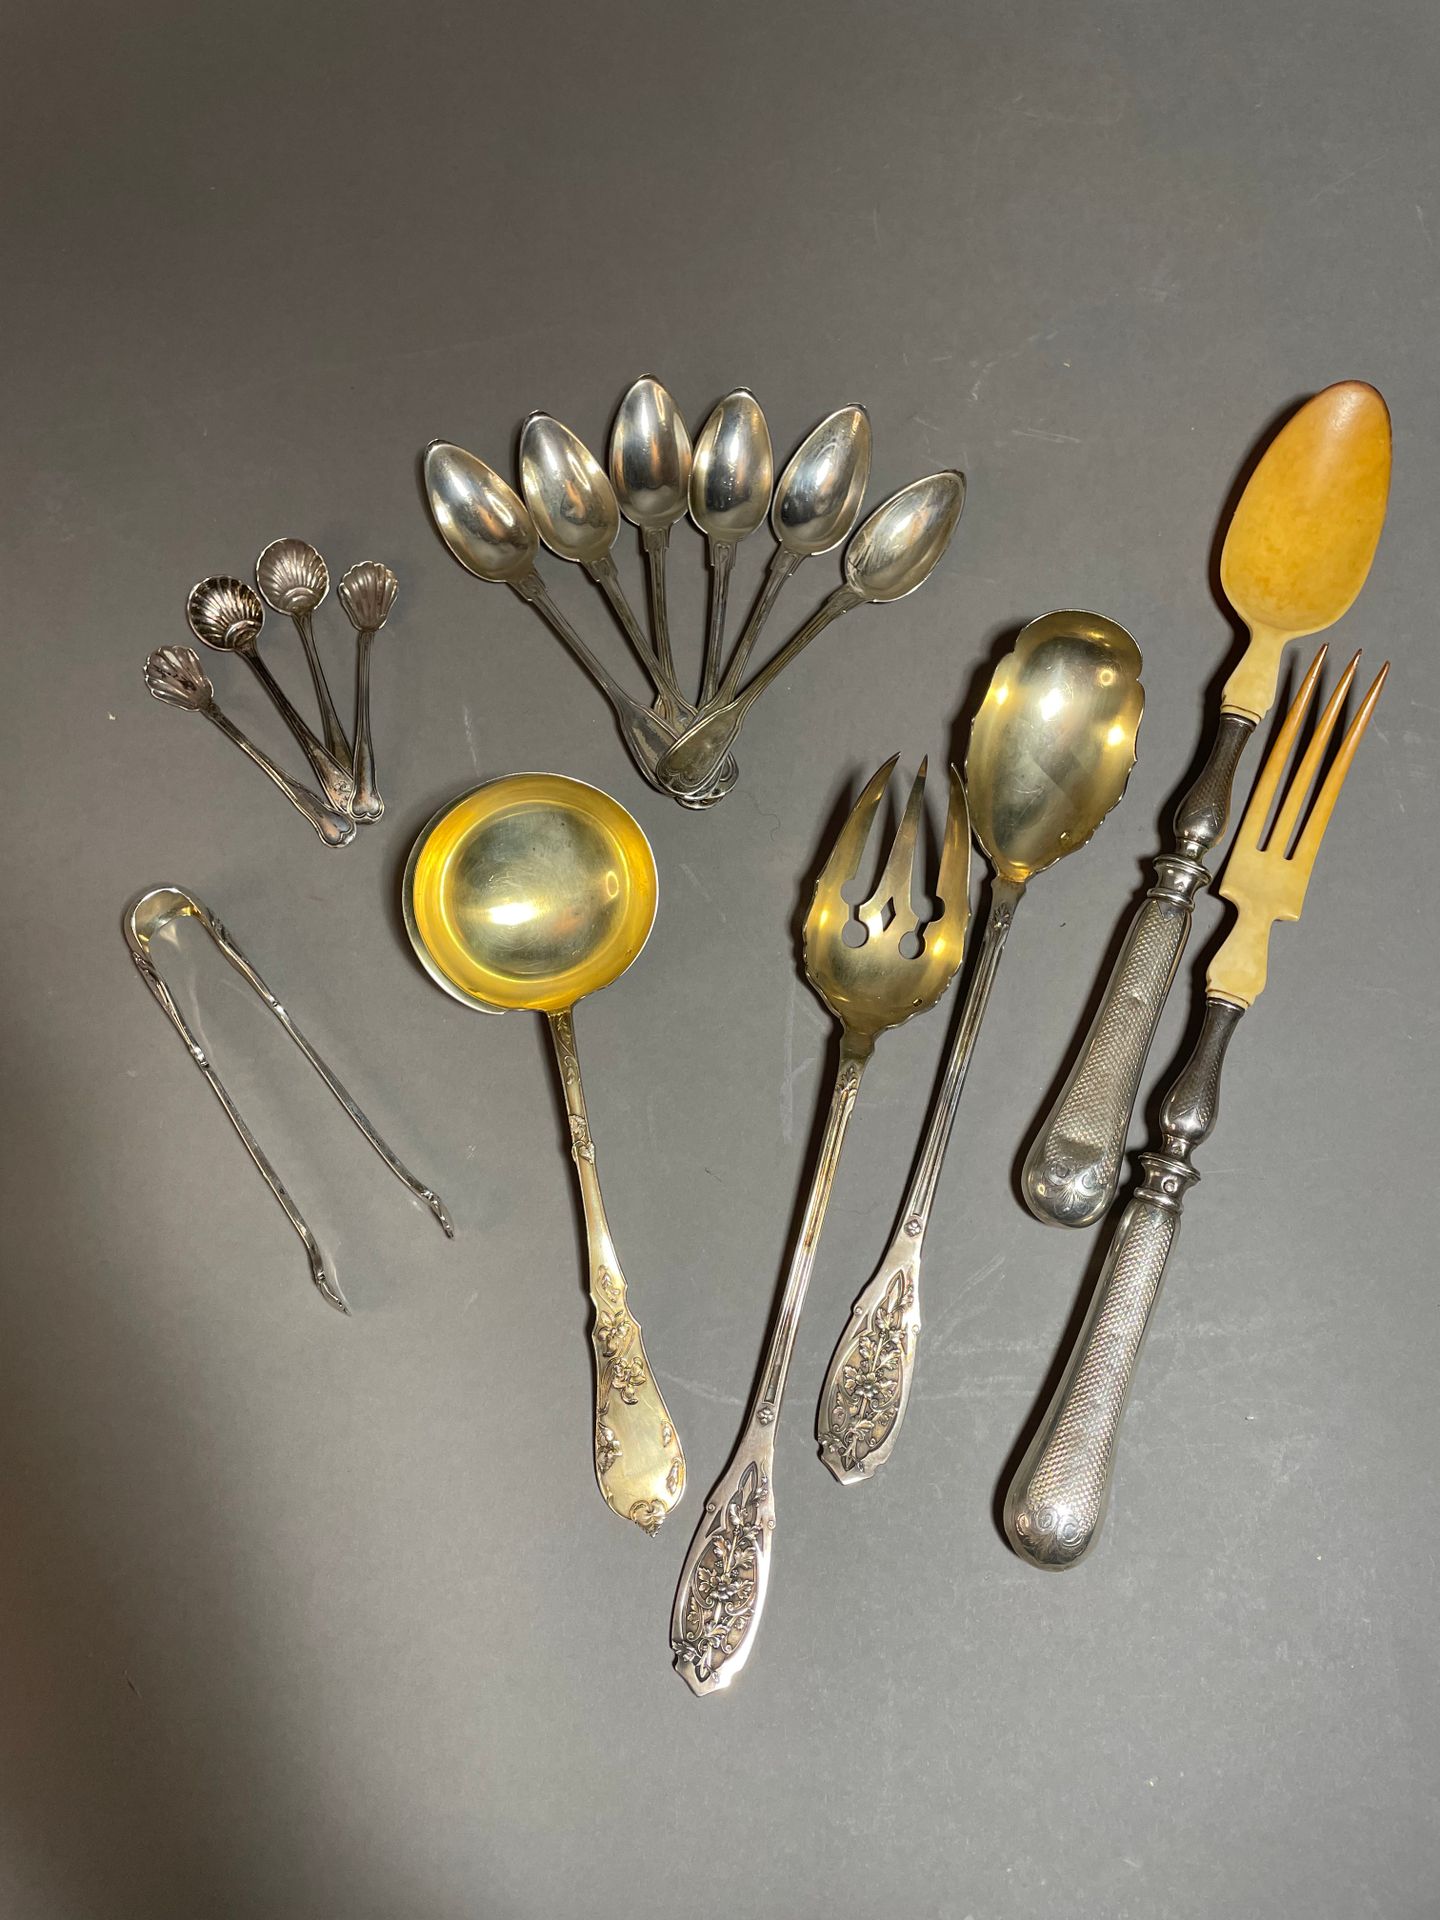 Null Lot in silver 925°°° including :
- 2 service cutlery
- A pair of tongs
- 4 &hellip;